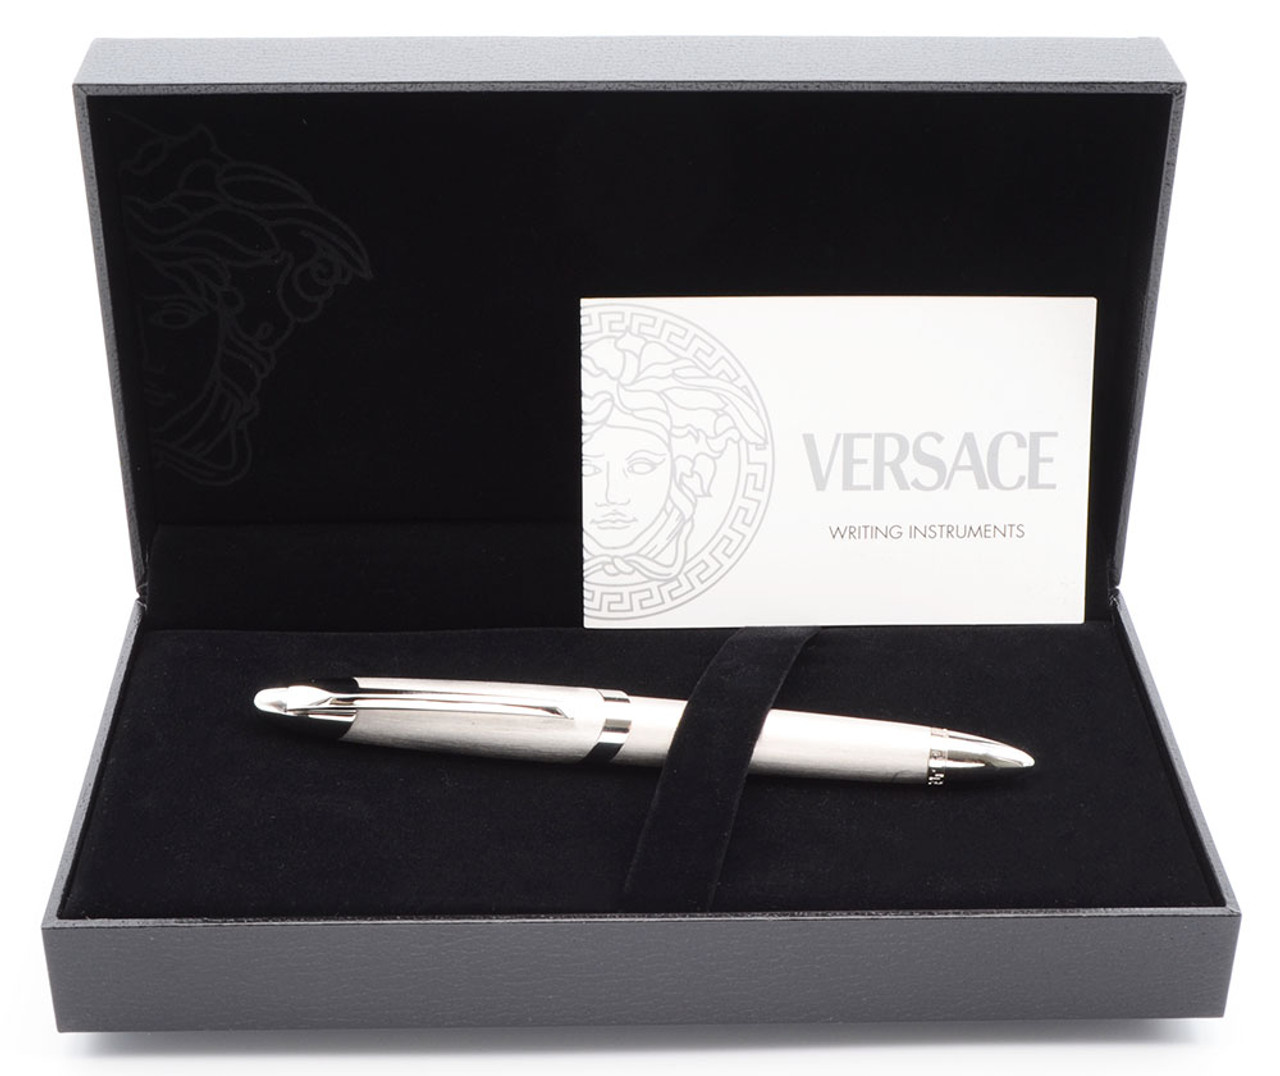 Versace Fountain Pen -  Stainless Steel (Matte and Polished), C/C, 18K Medium Nib (Near Mint in Box, Never Inked)